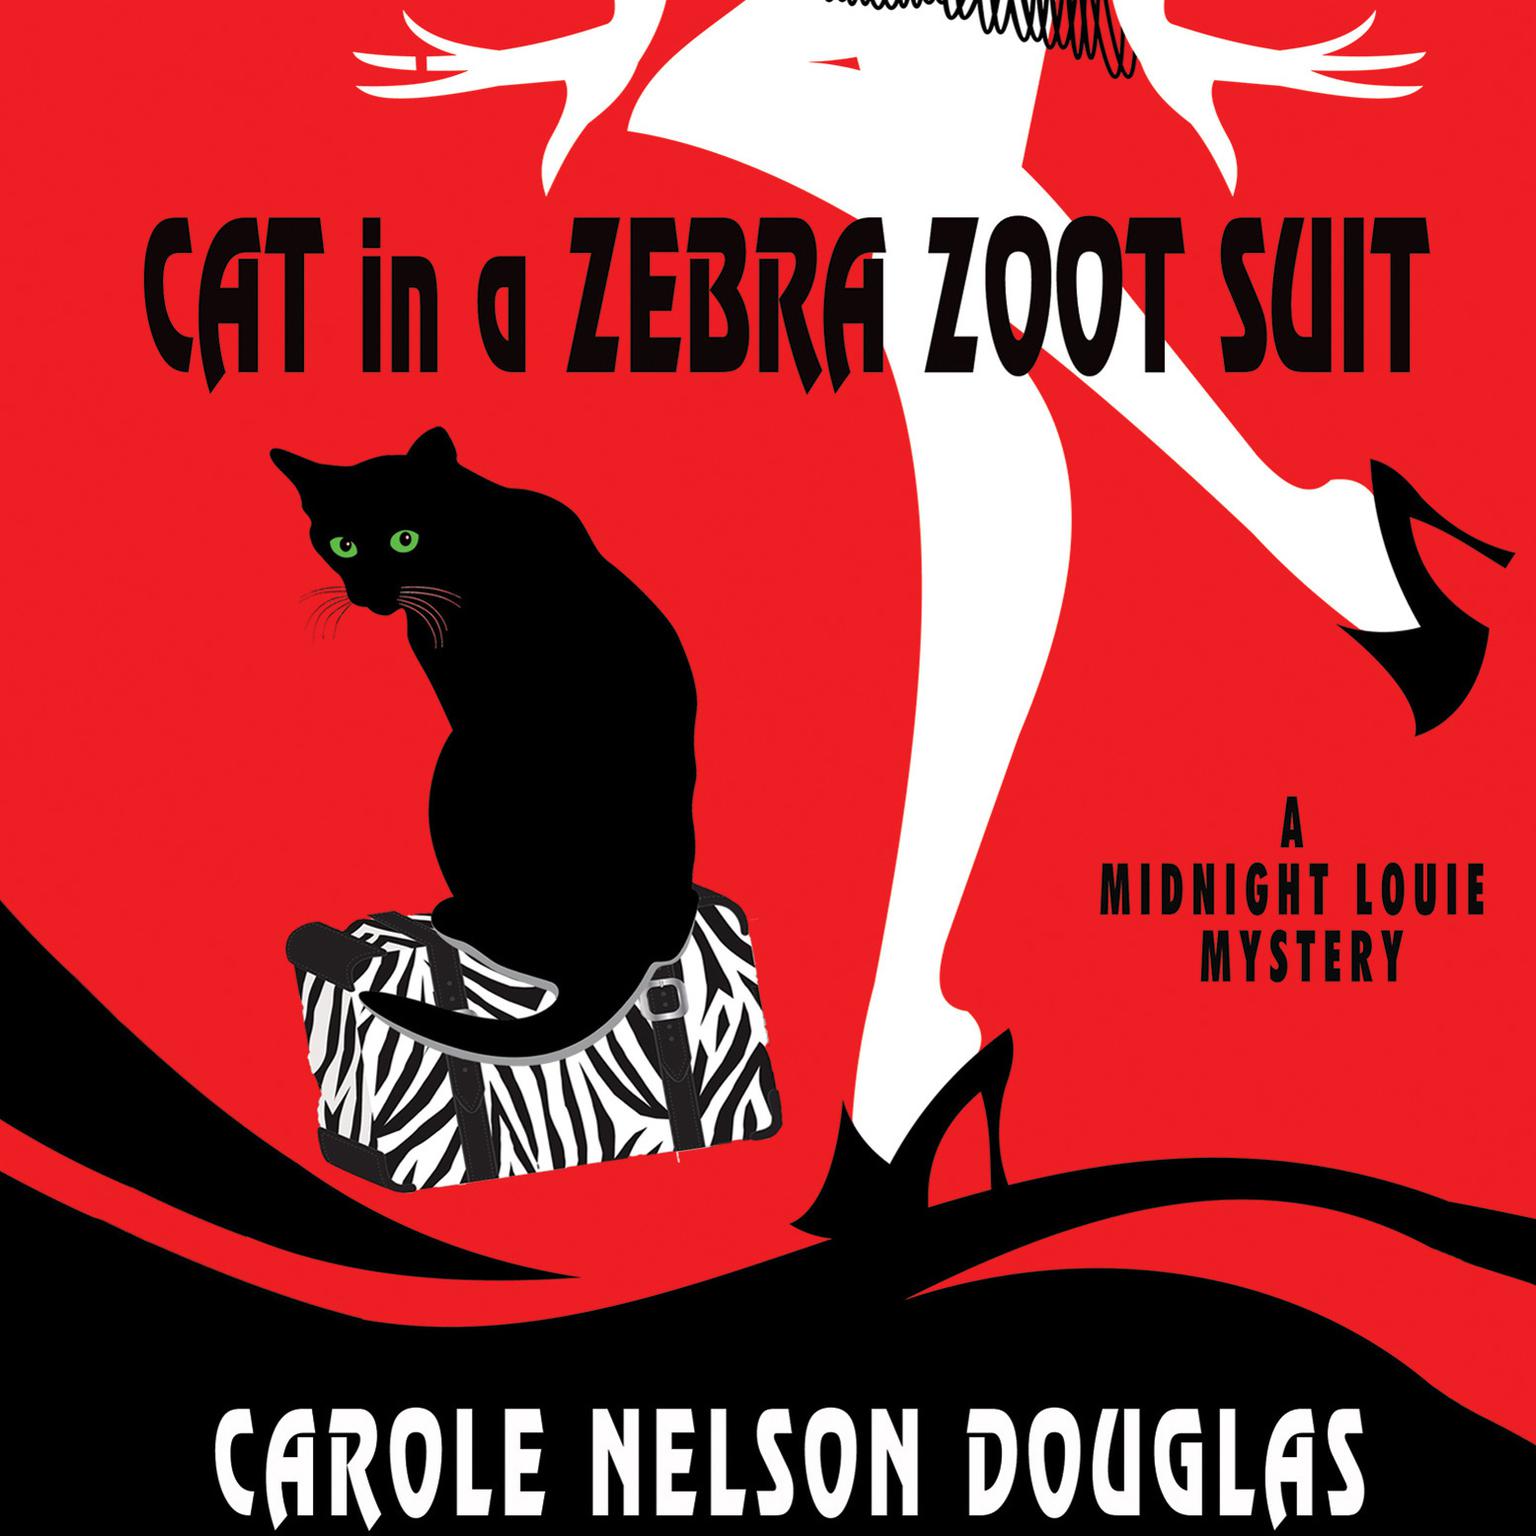 Cat in a Zebra Zoot Suit: A Midnight Louie Mystery Audiobook, by Carole Nelson Douglas